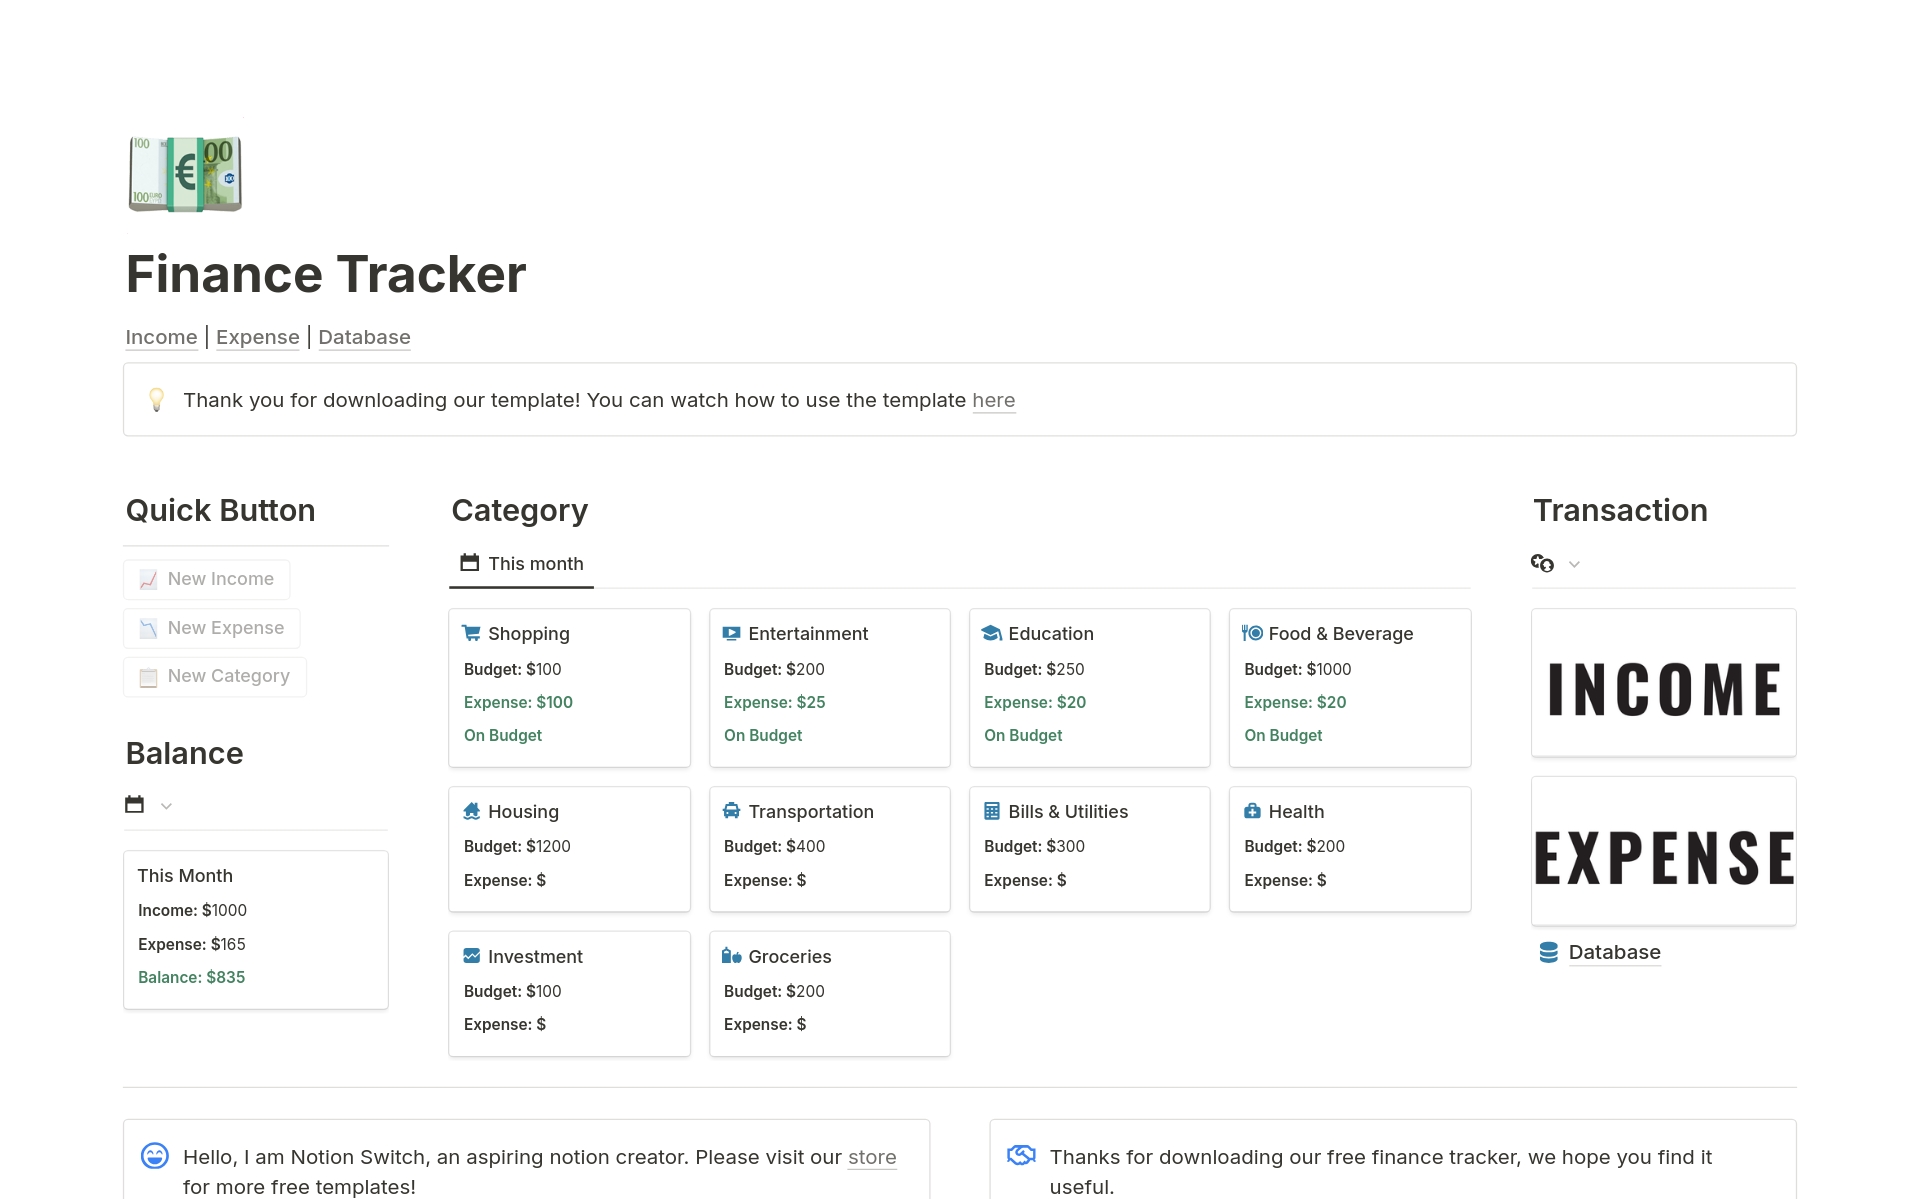 Track your Wealth, Organize your Finance, and Make your Money Thrive.

"Introducing the new Finance Tracker template, your personal financial companion! 💰📊
